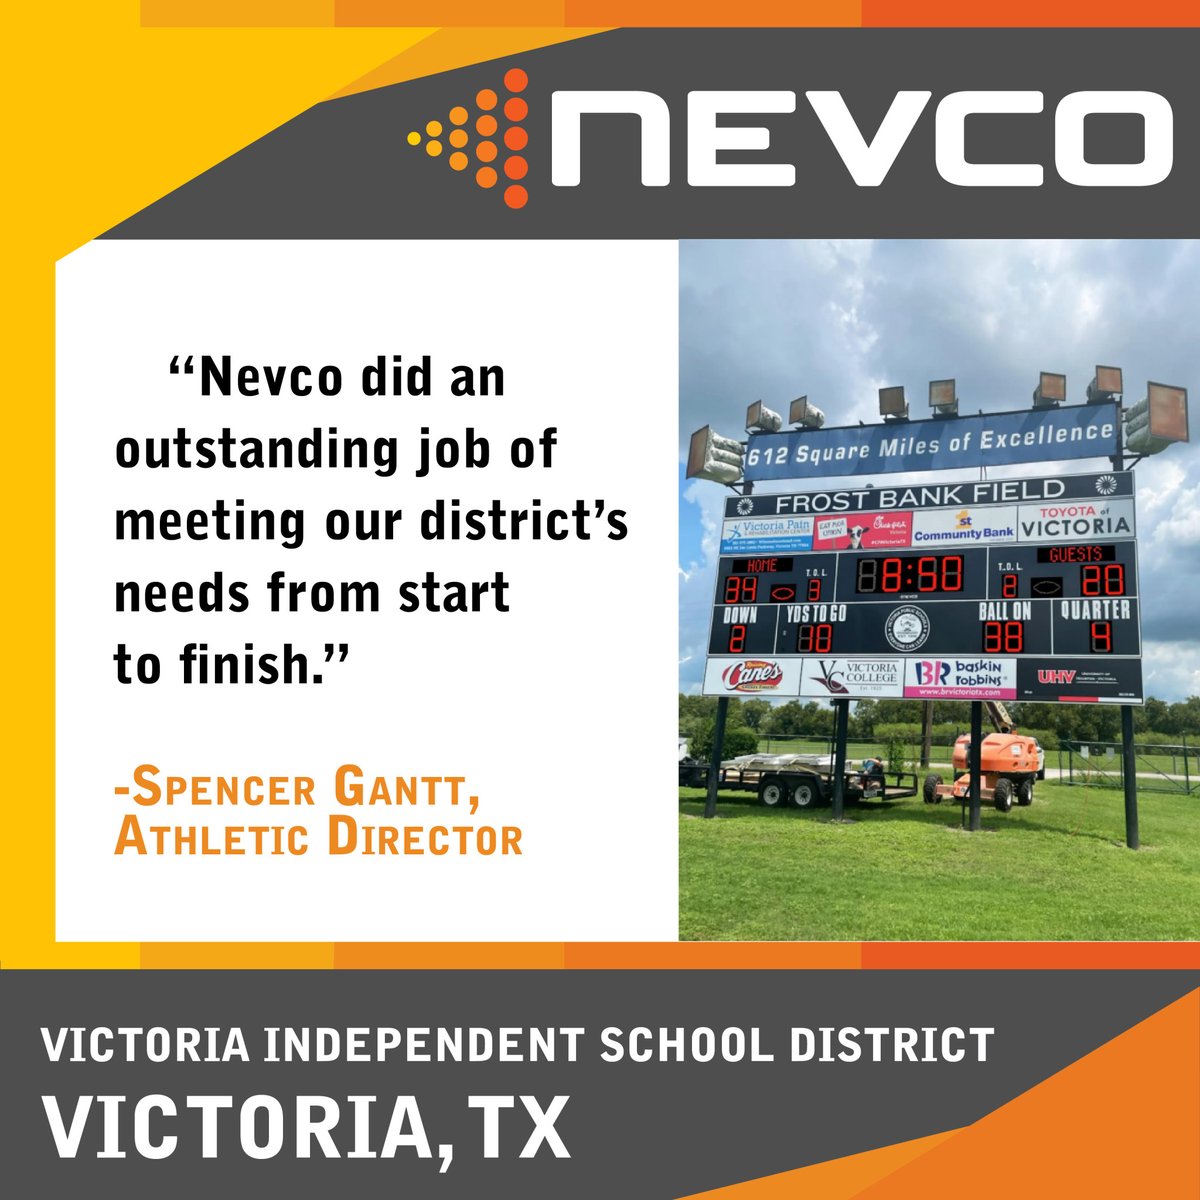 Big thanks to Spencer Gantt, Athletic Director of Victoria Independent School District in Texas, for the glowing testimonial! 🌟📣 We're thrilled to have met your district's needs and look forward to continuing to exceed expectations. #nevco #displays #led #scoreboards